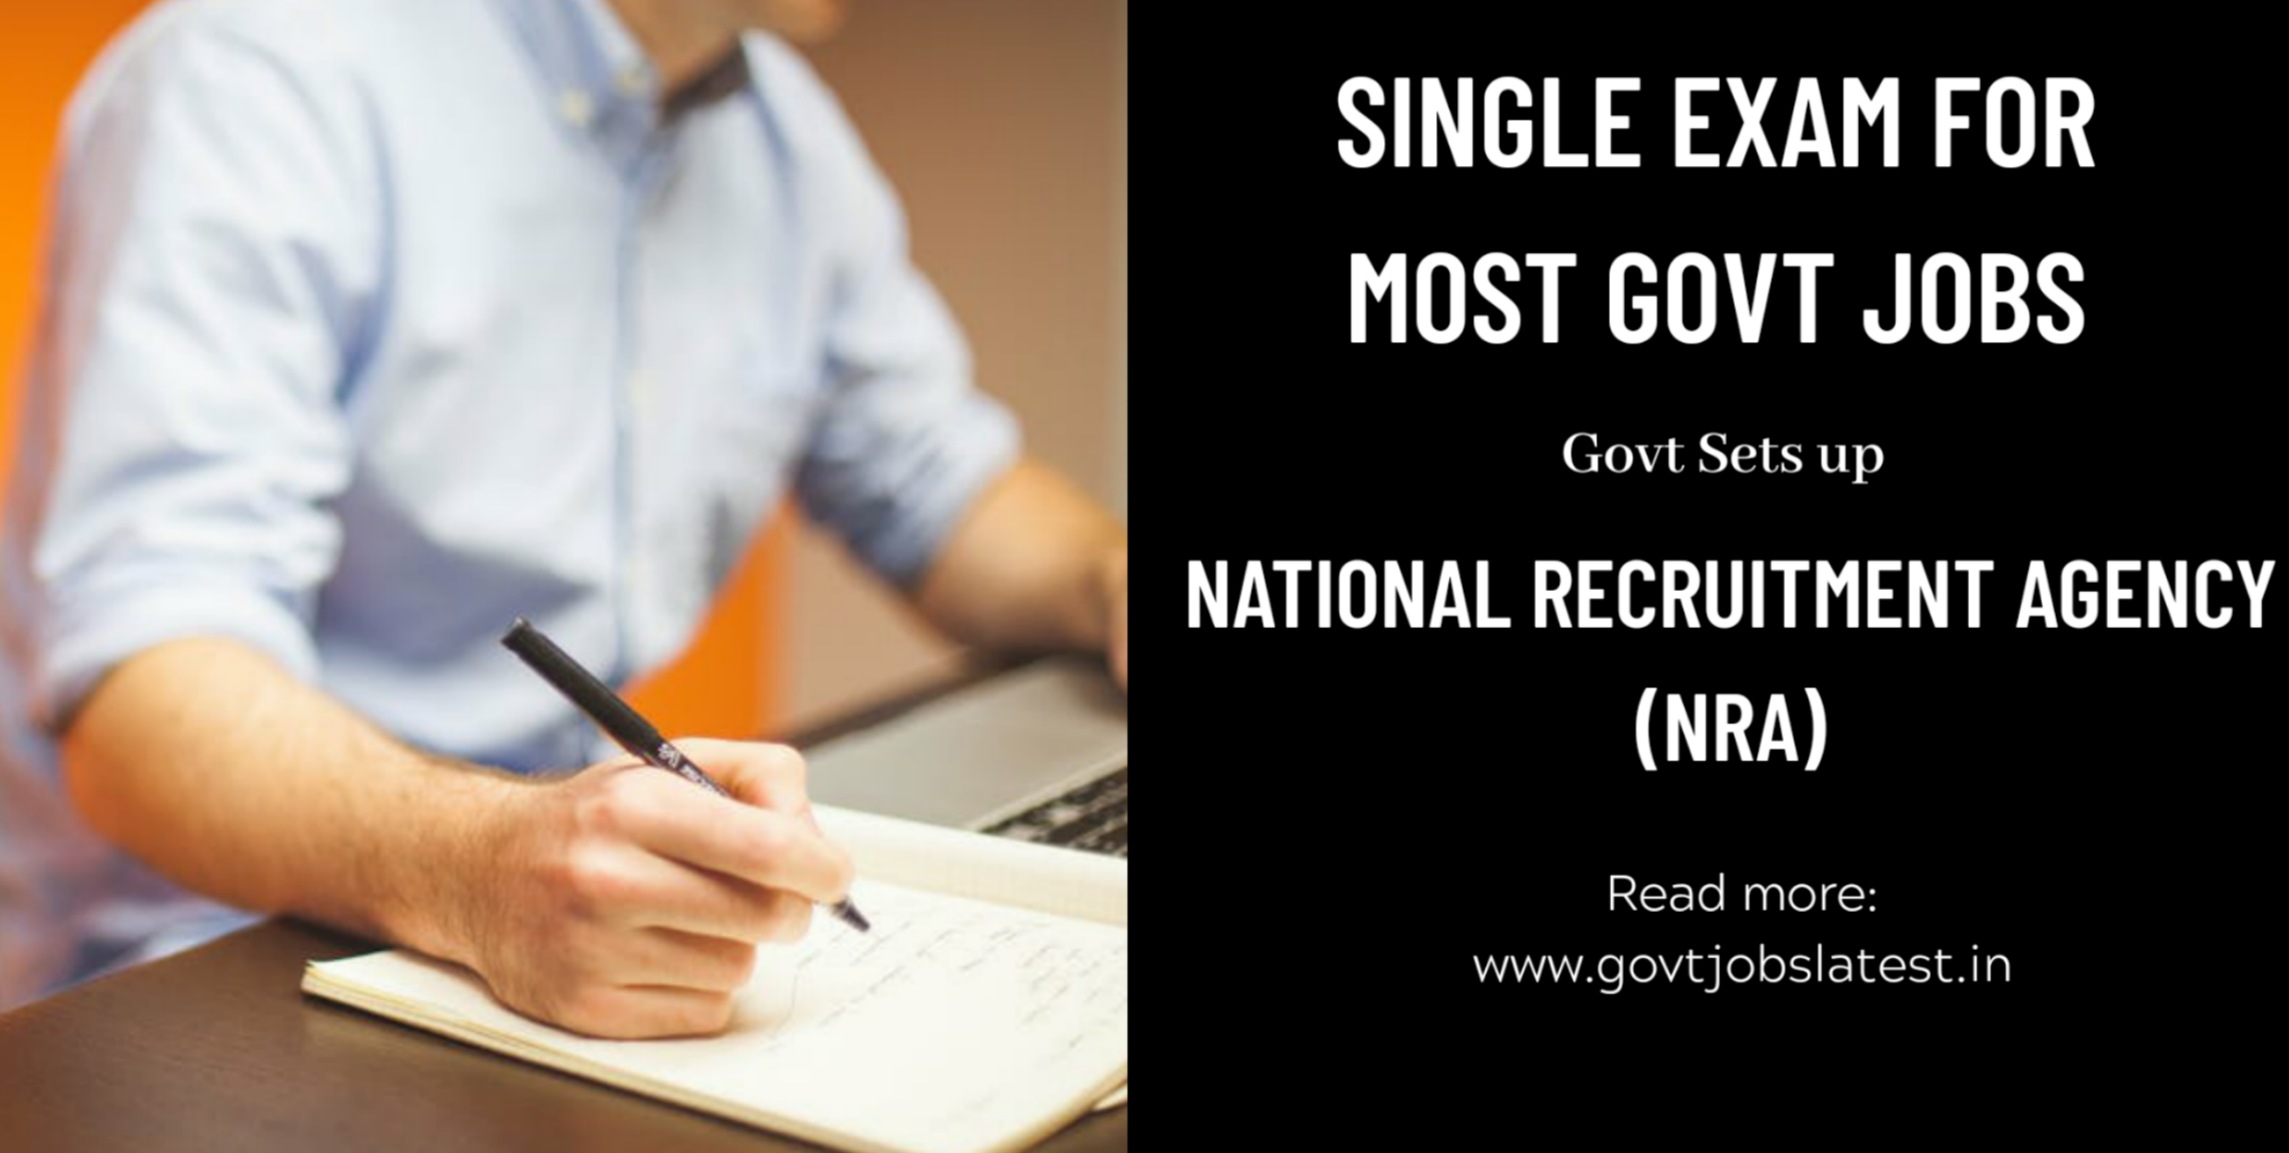 Soon single exam for most govt jobs - Govt sets up NRA